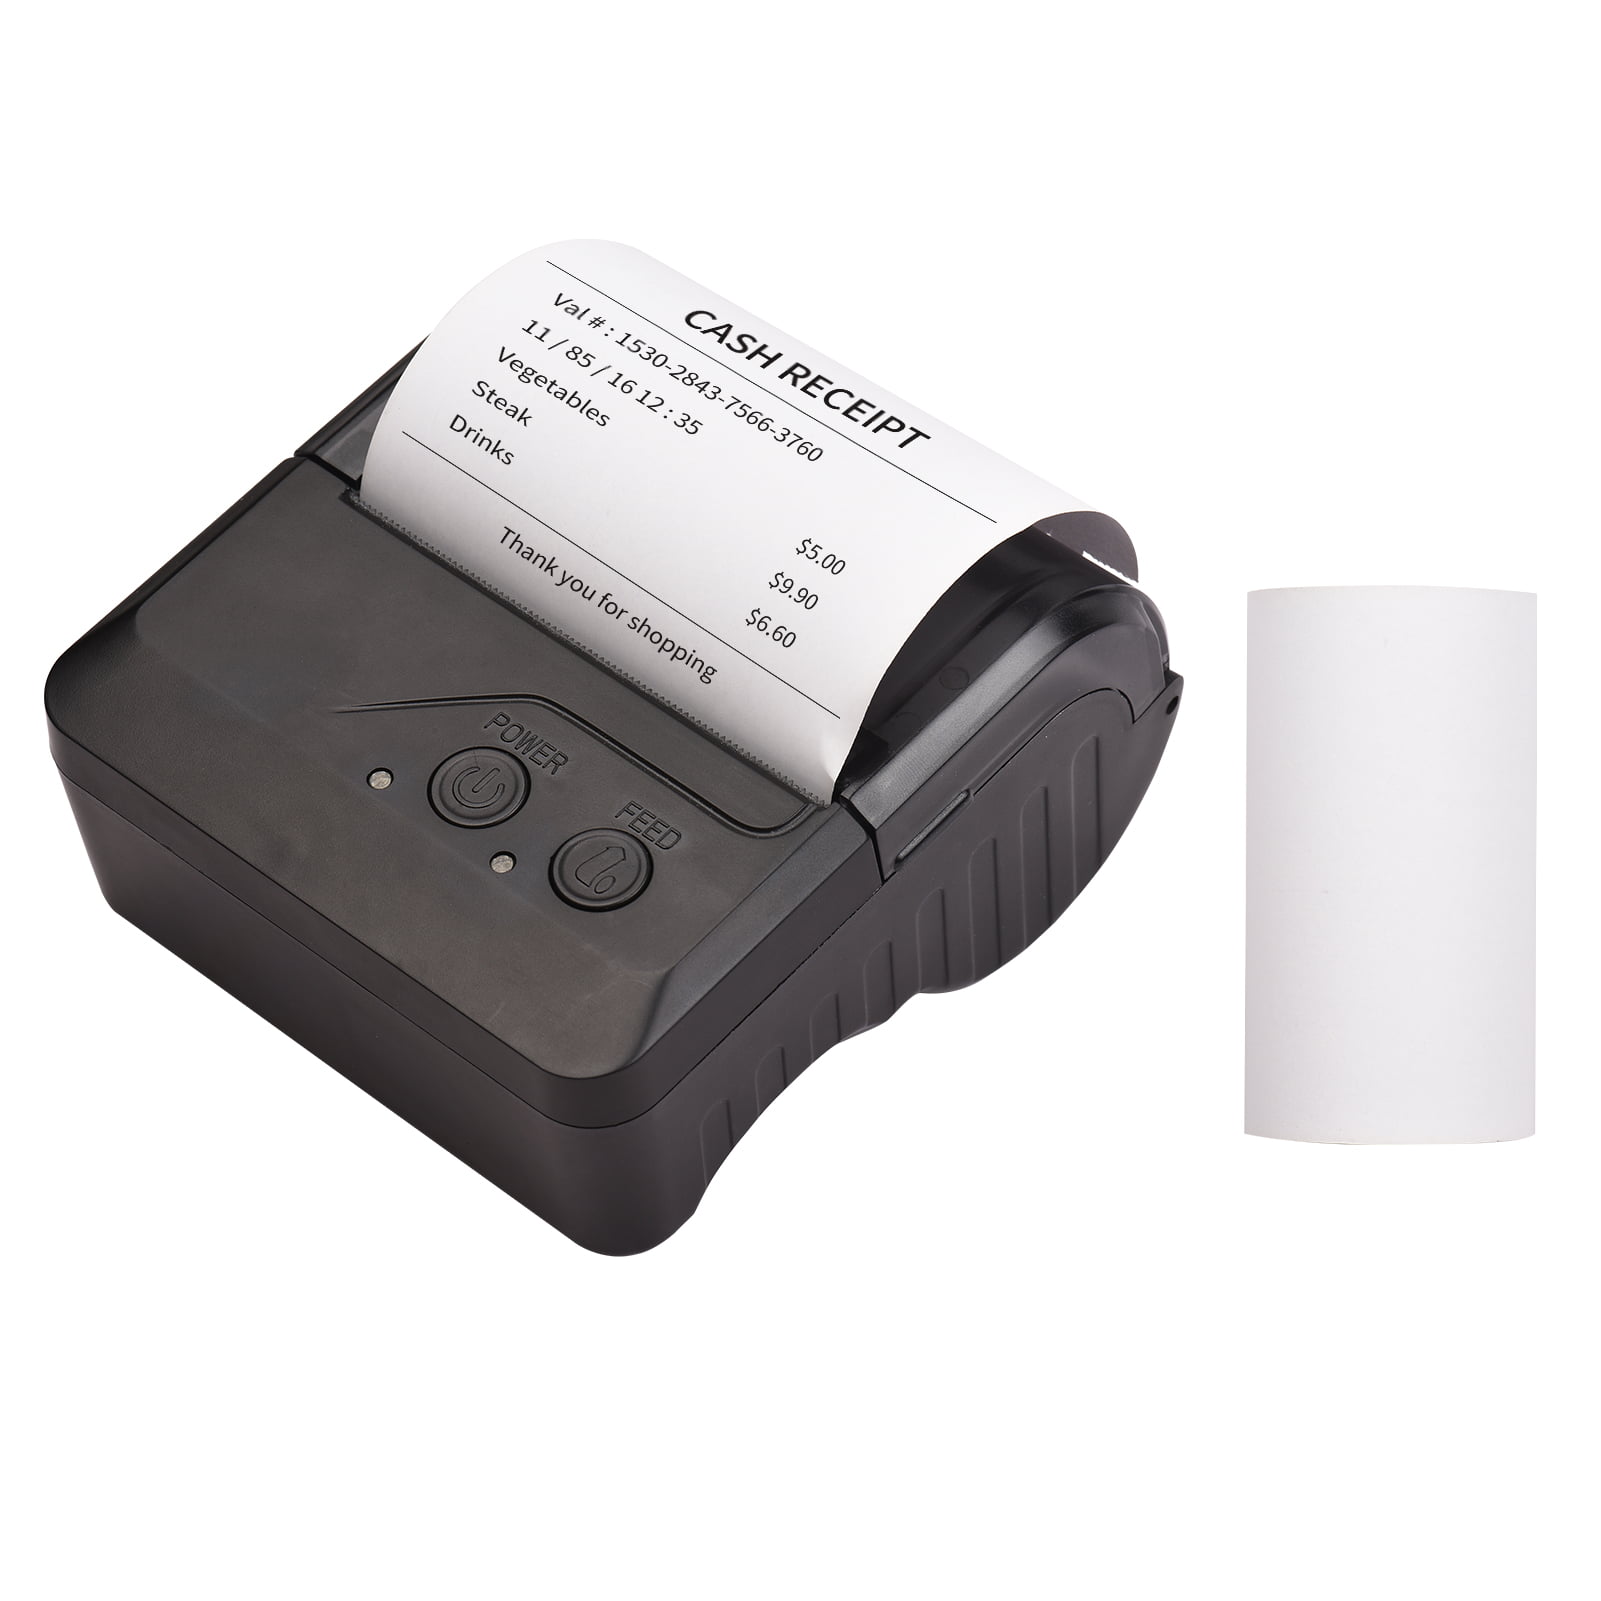 Thermal Printer Label Printer 80MM Mini Thermal Receipt Printer Barcode Receipt Fast Printer Support USB Wireless/WiFi Compatible with iOS Android Windows